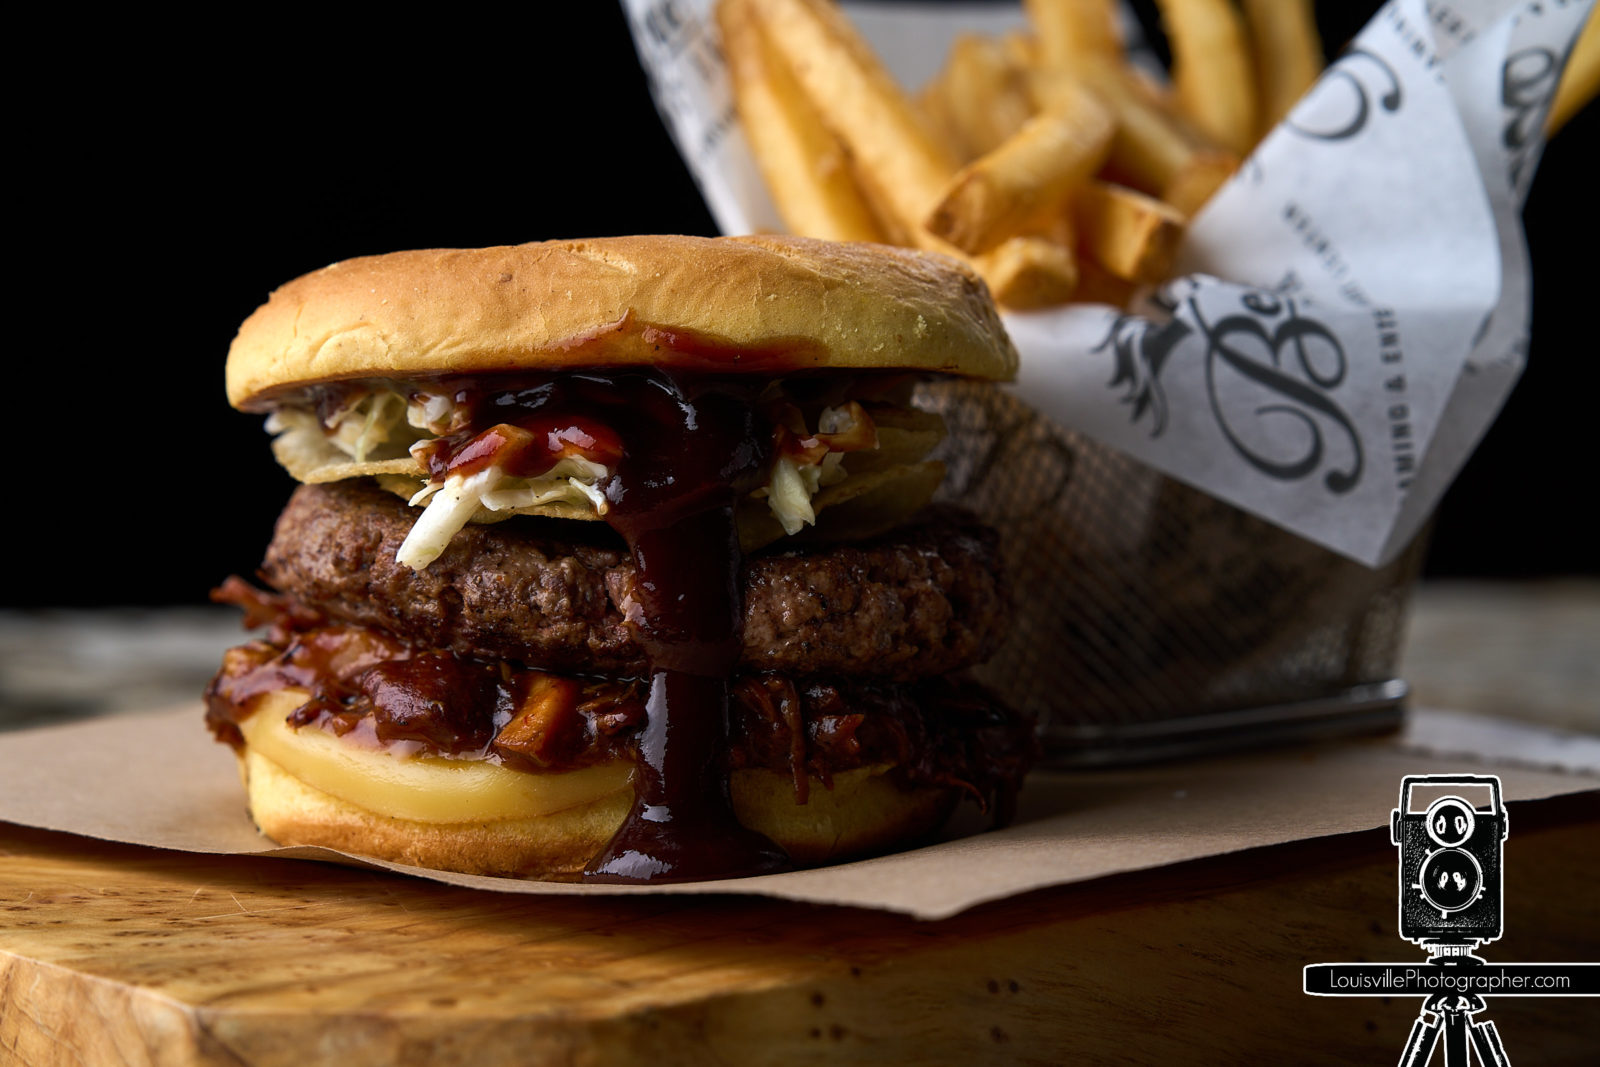 Louisville Commercial Food Photographer - It's Burger Time!